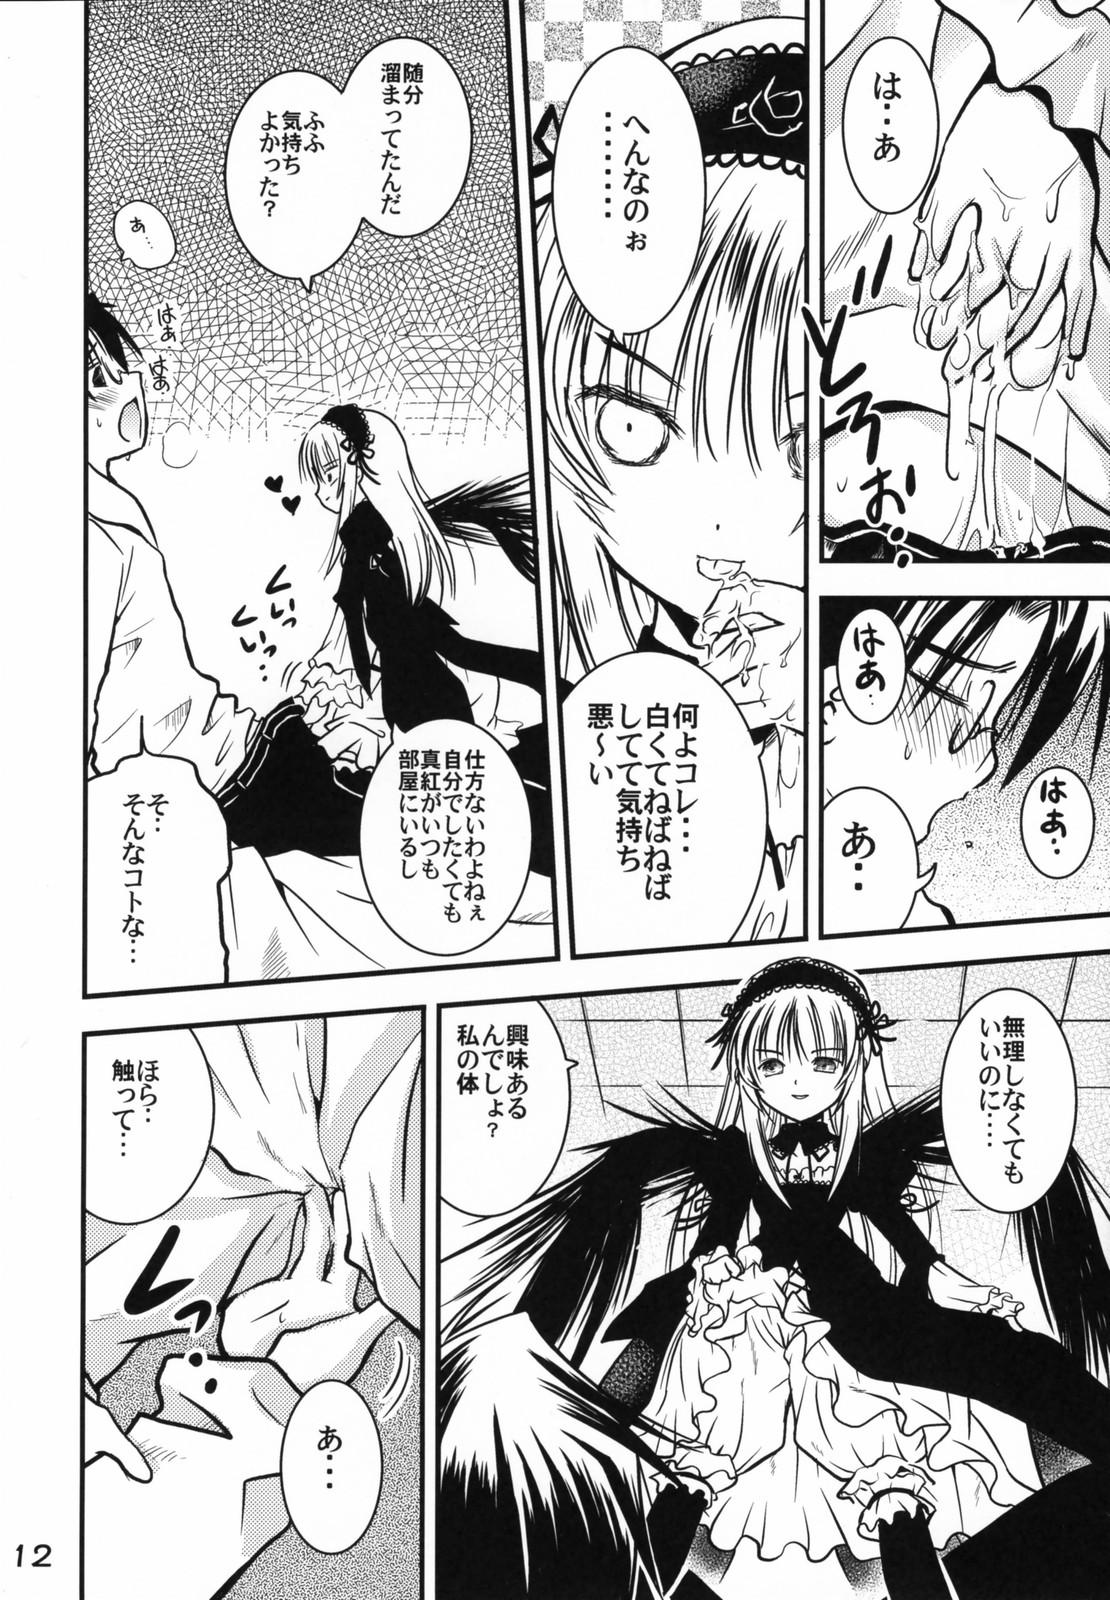 Lick A caprice - Rozen maiden Gay Shop - Page 11